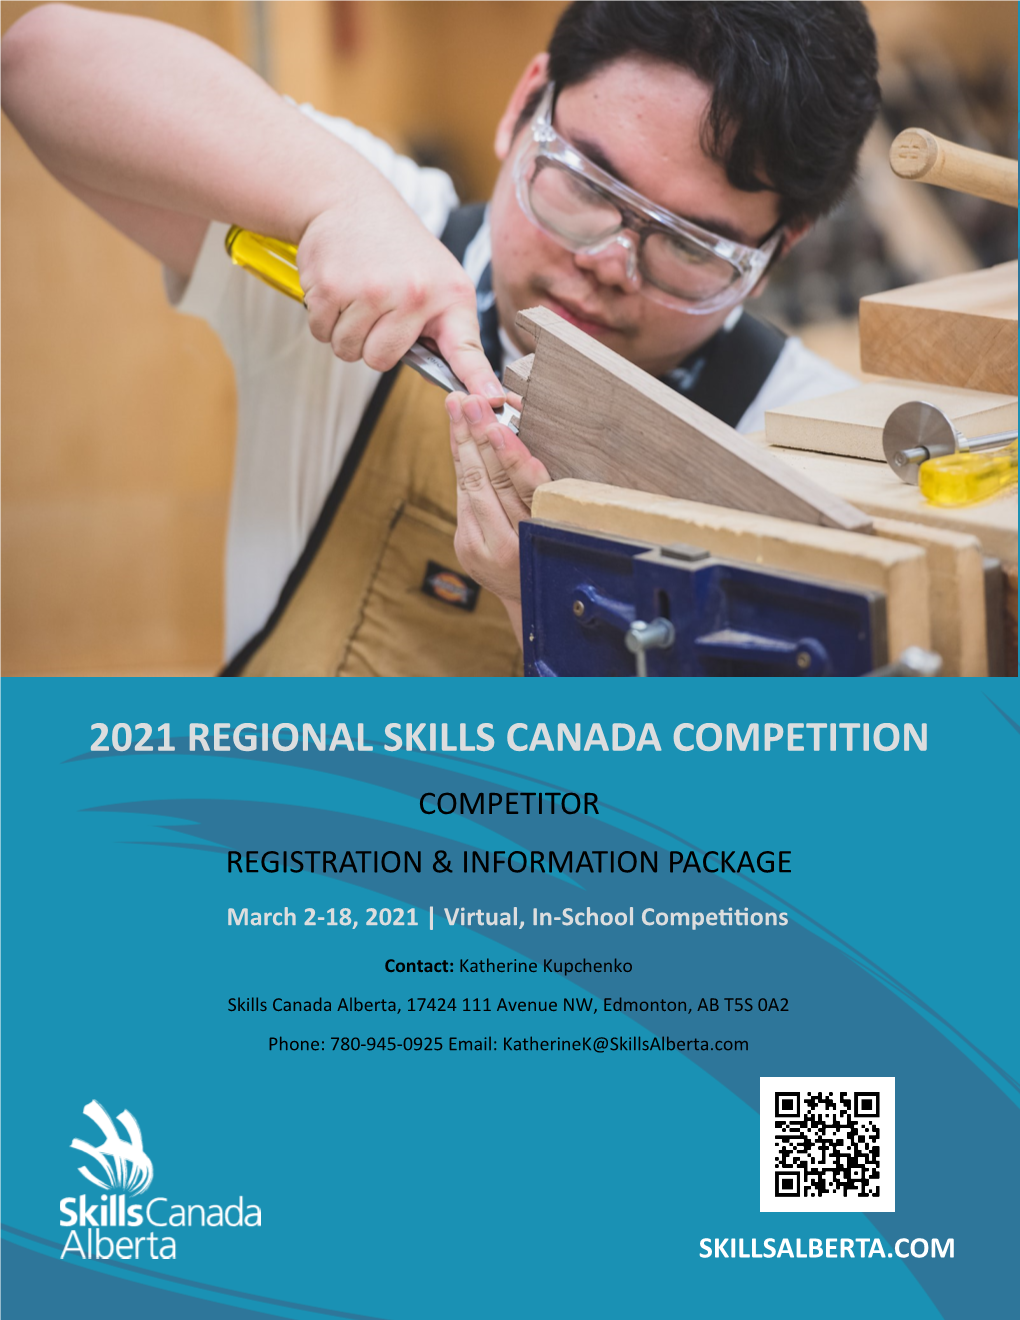 2021 REGIONAL SKILLS CANADA COMPETITION COMPETITOR REGISTRATION & INFORMATION PACKAGE March 2-18, 2021 | Virtual, In-School Competitions